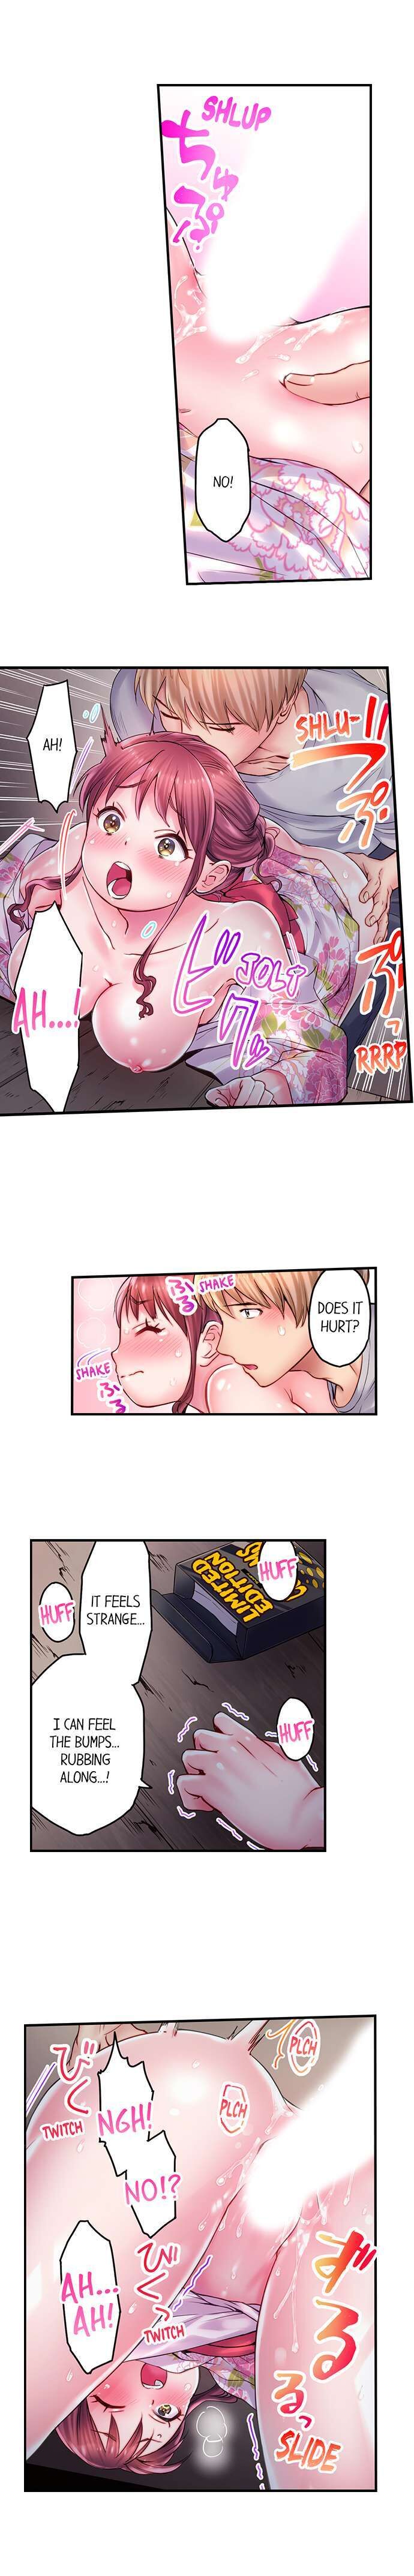 You'll Cum in Less Than a Minute! - Chapter 12 Page 2